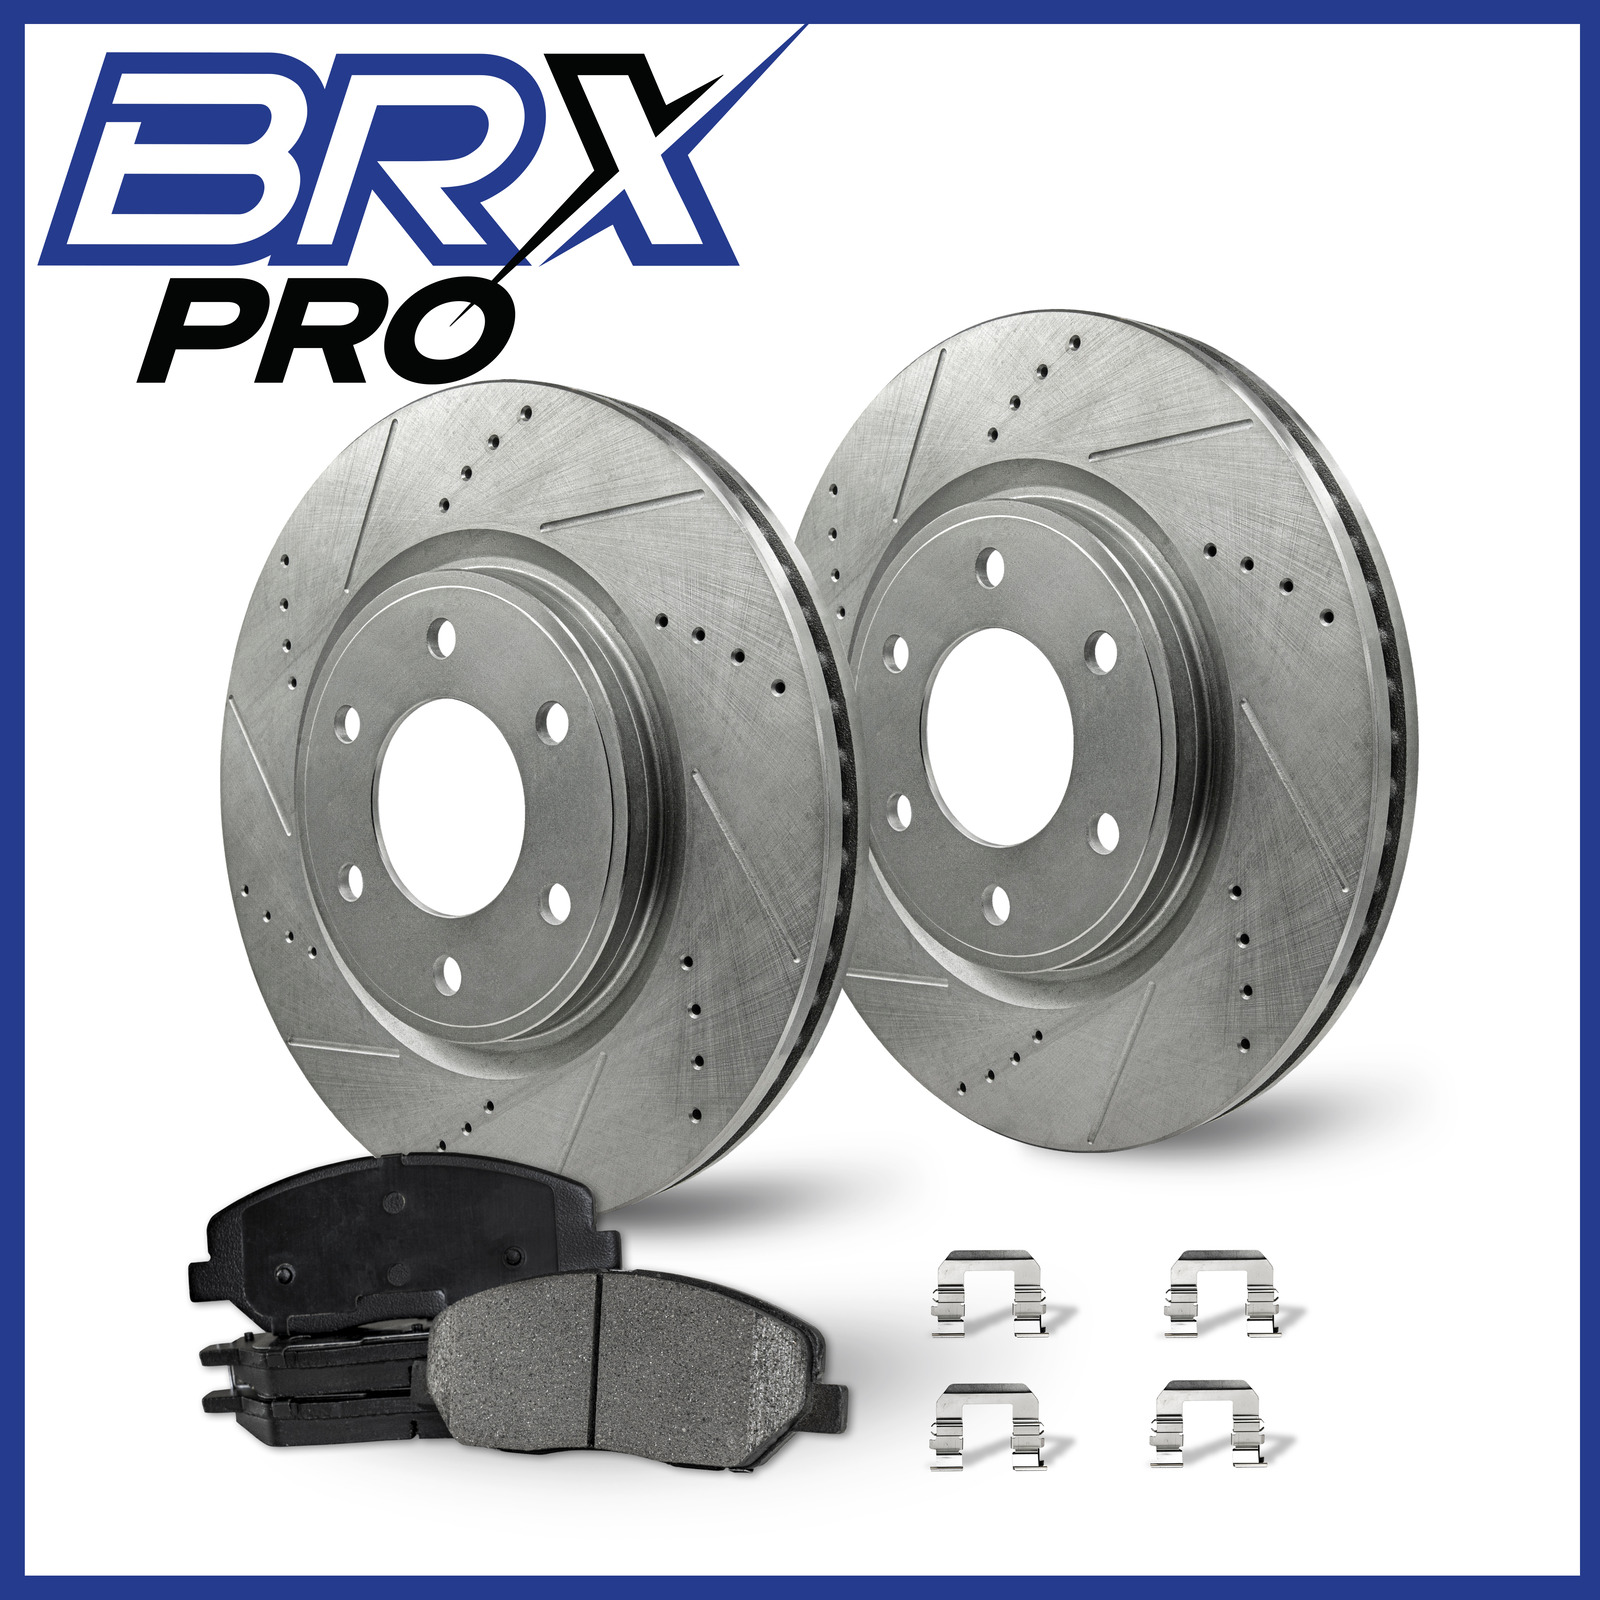 330 mm Front Rotor + Pads For Chevy Silverado 1500 05-07|NO RUST Brake Kit